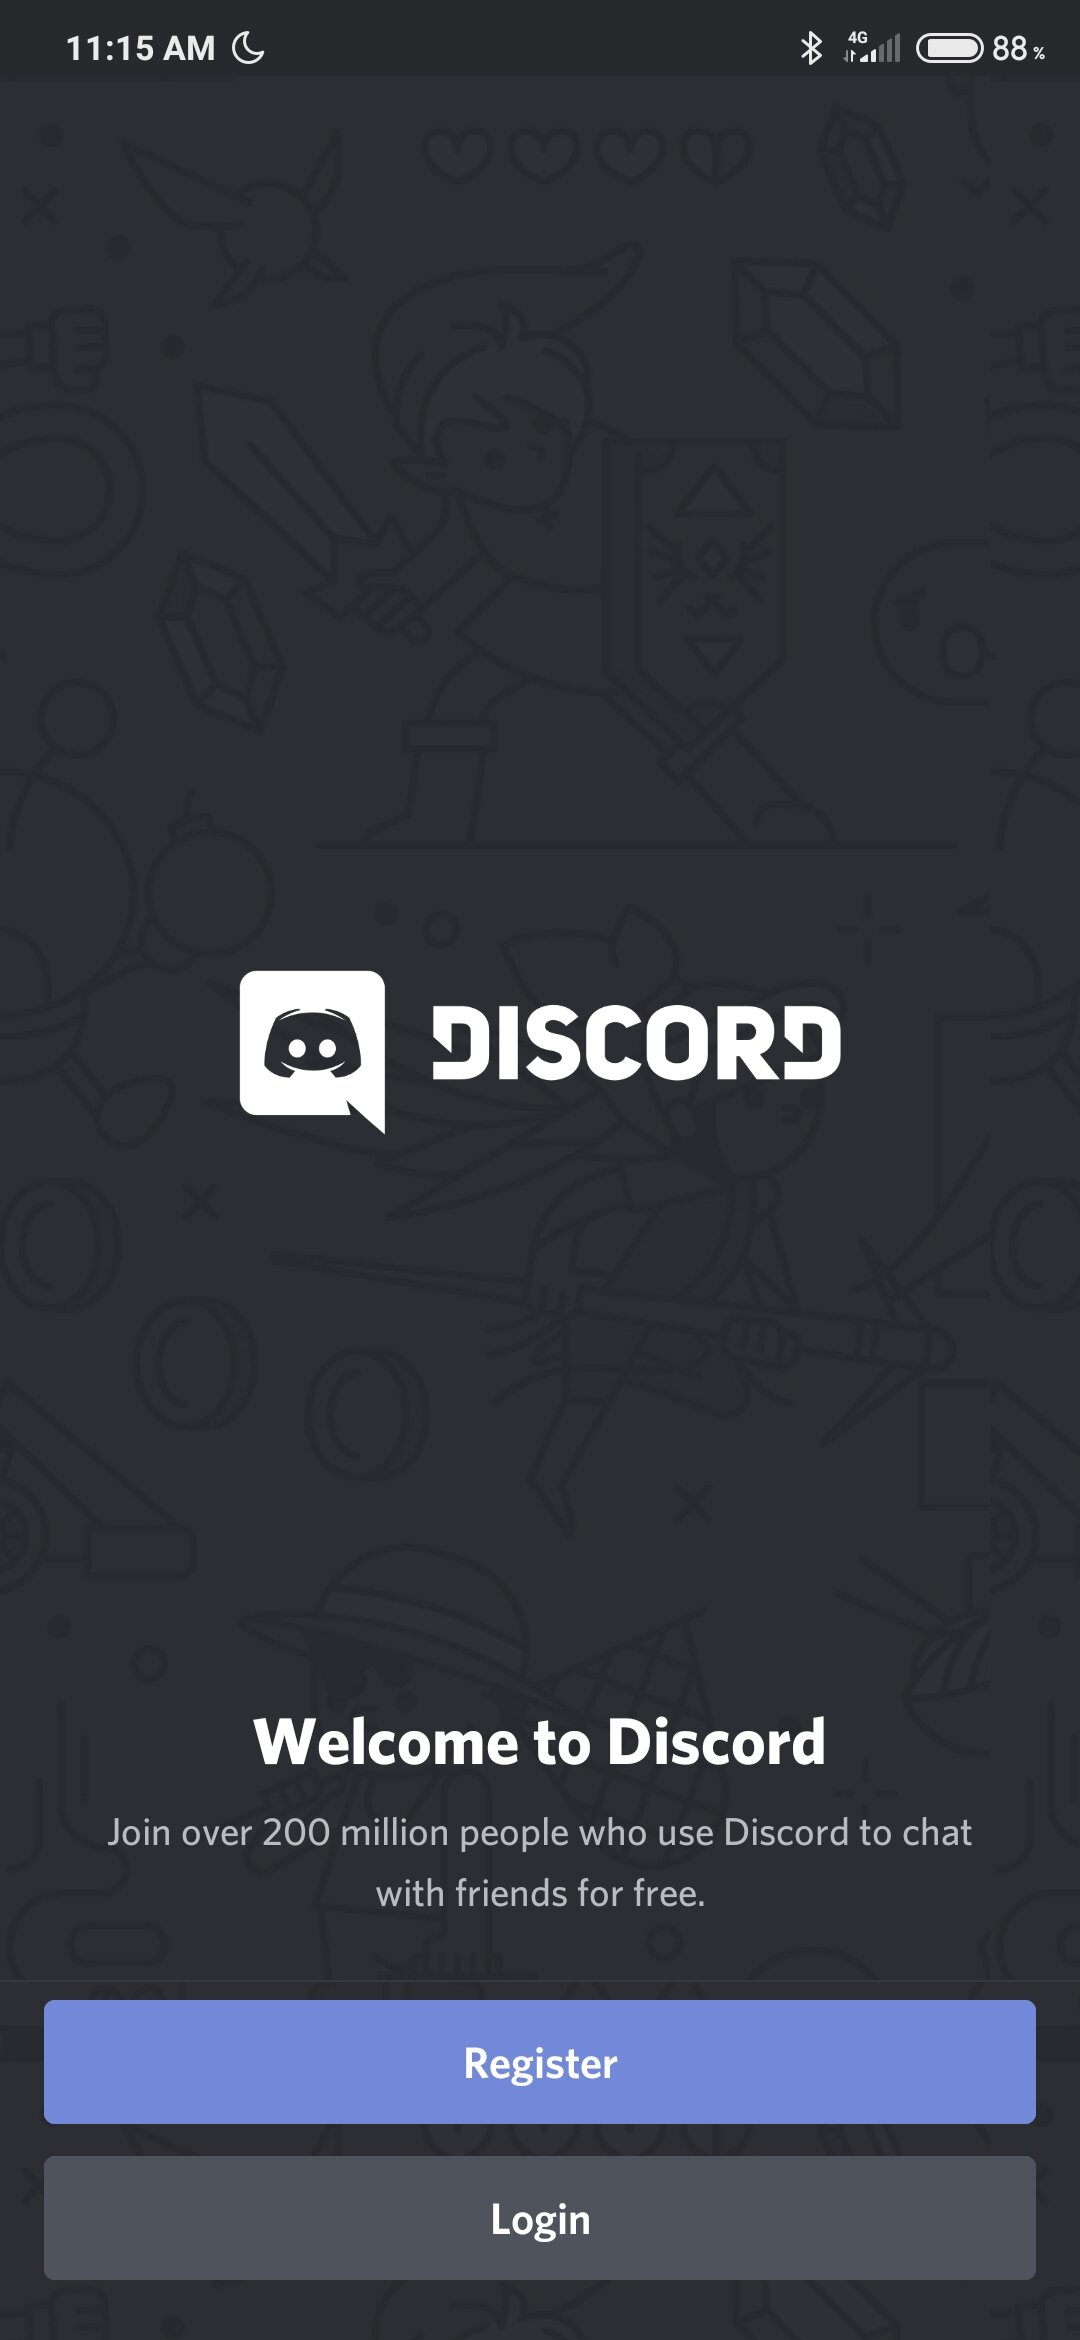 Does discord log chat